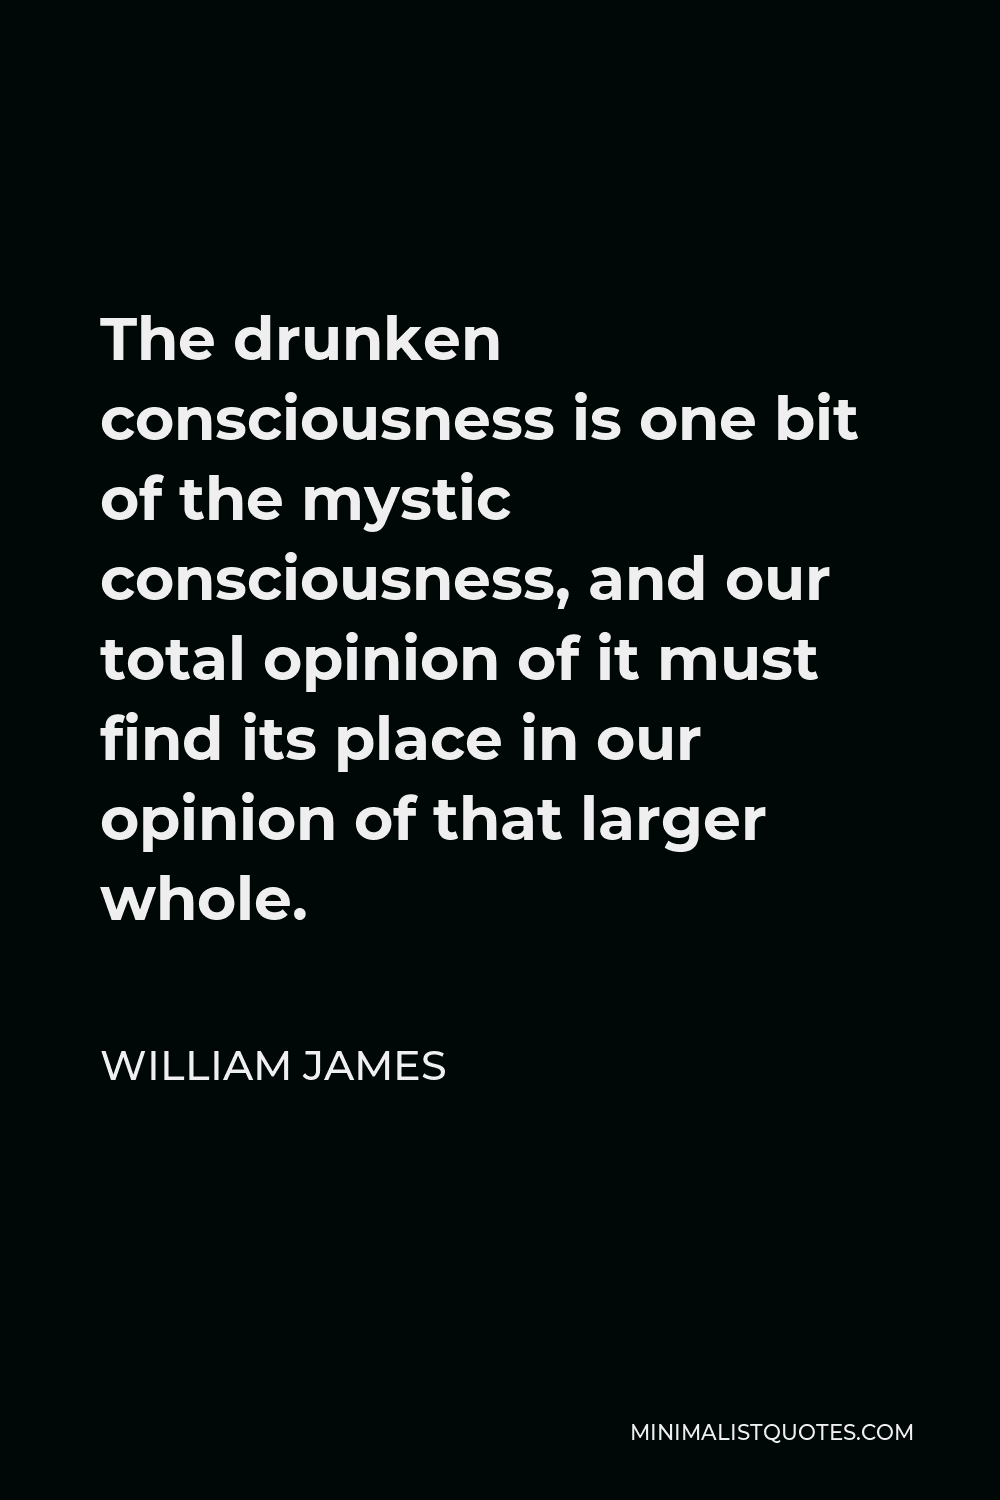 William James Quote - The drunken consciousness is one bit of the mystic consciousness, and our total opinion of it must find its place in our opinion of that larger whole.